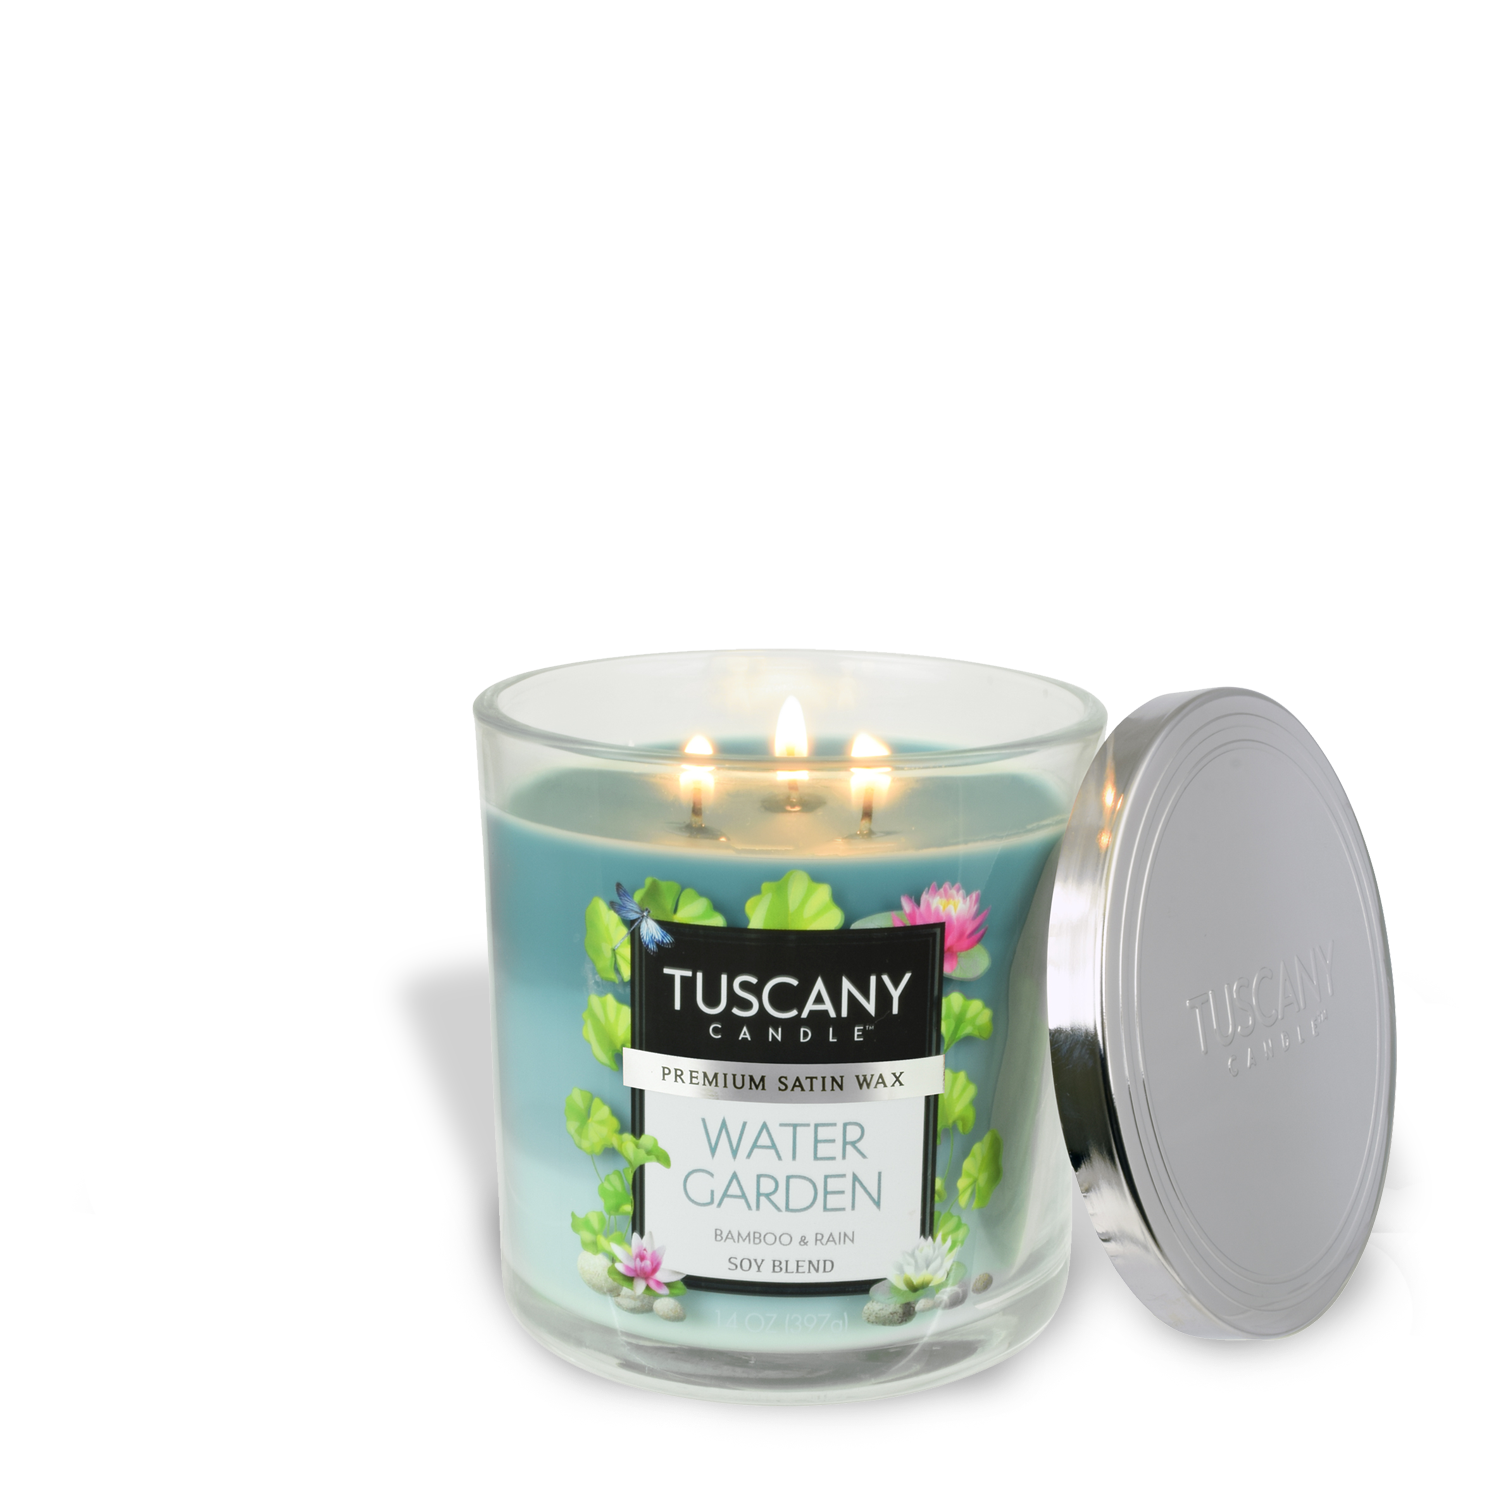 Water Garden Long-Lasting Scented Jar Candle (14 oz)